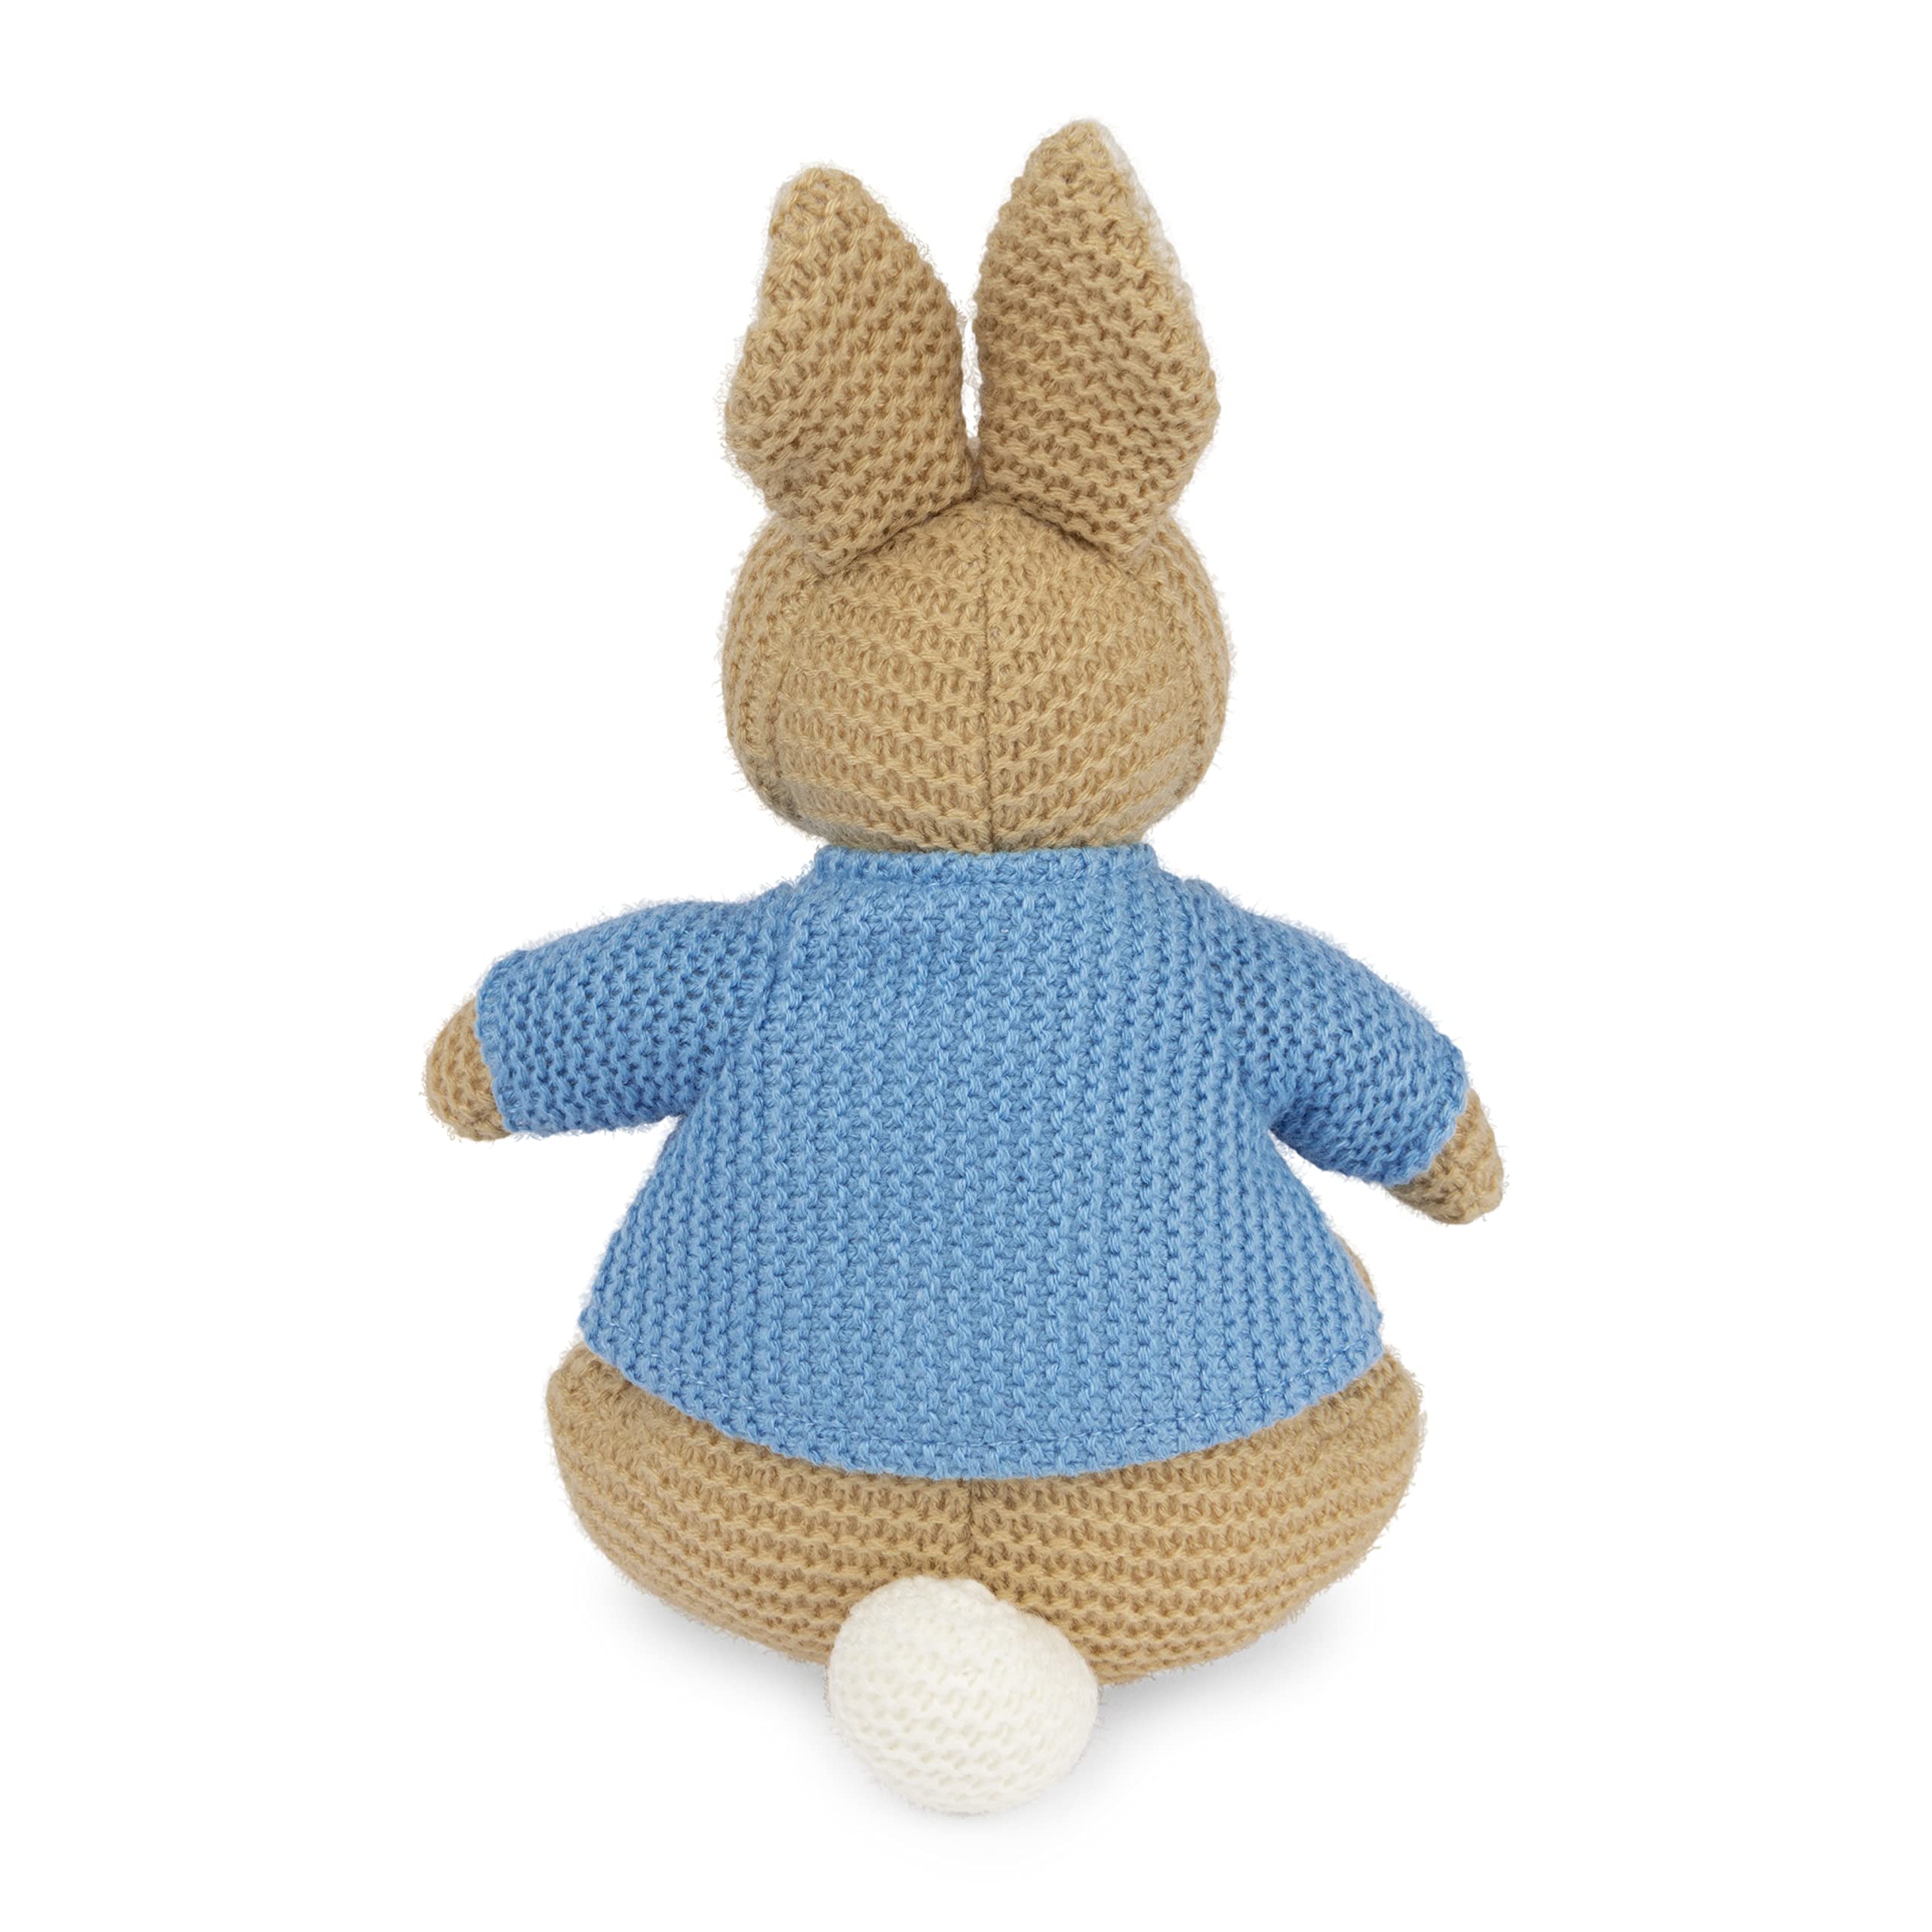 GUND Beatrix Potter Peter Rabbit Knit Plush, Stuffed Animal for Ages 1 and Up, Brown/Blue, 6.5”